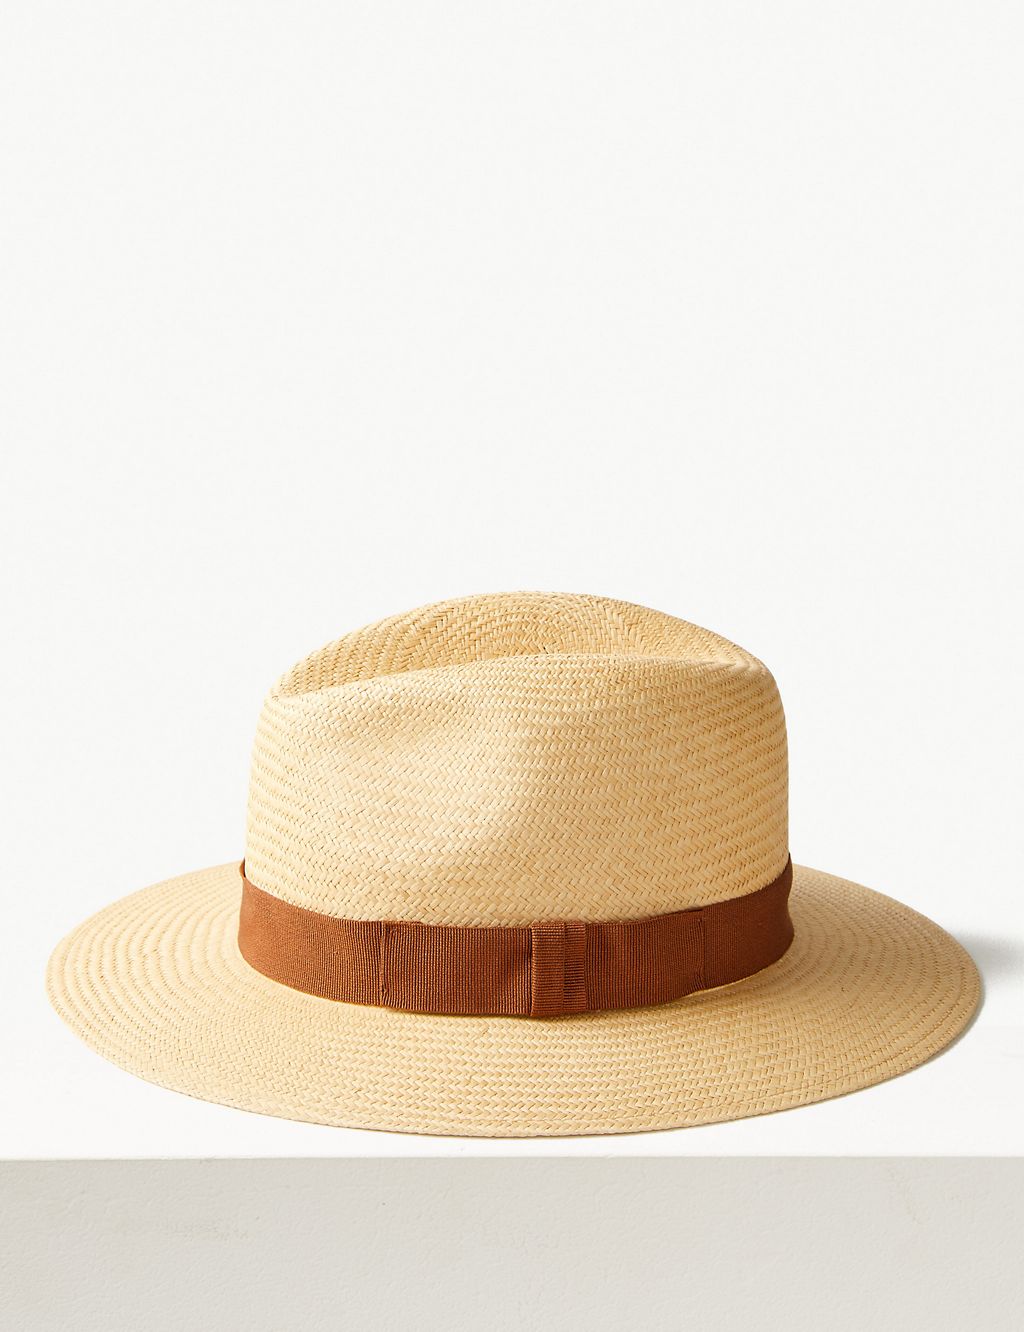 Luxury Panama Hat Made by Christys’ 3 of 4